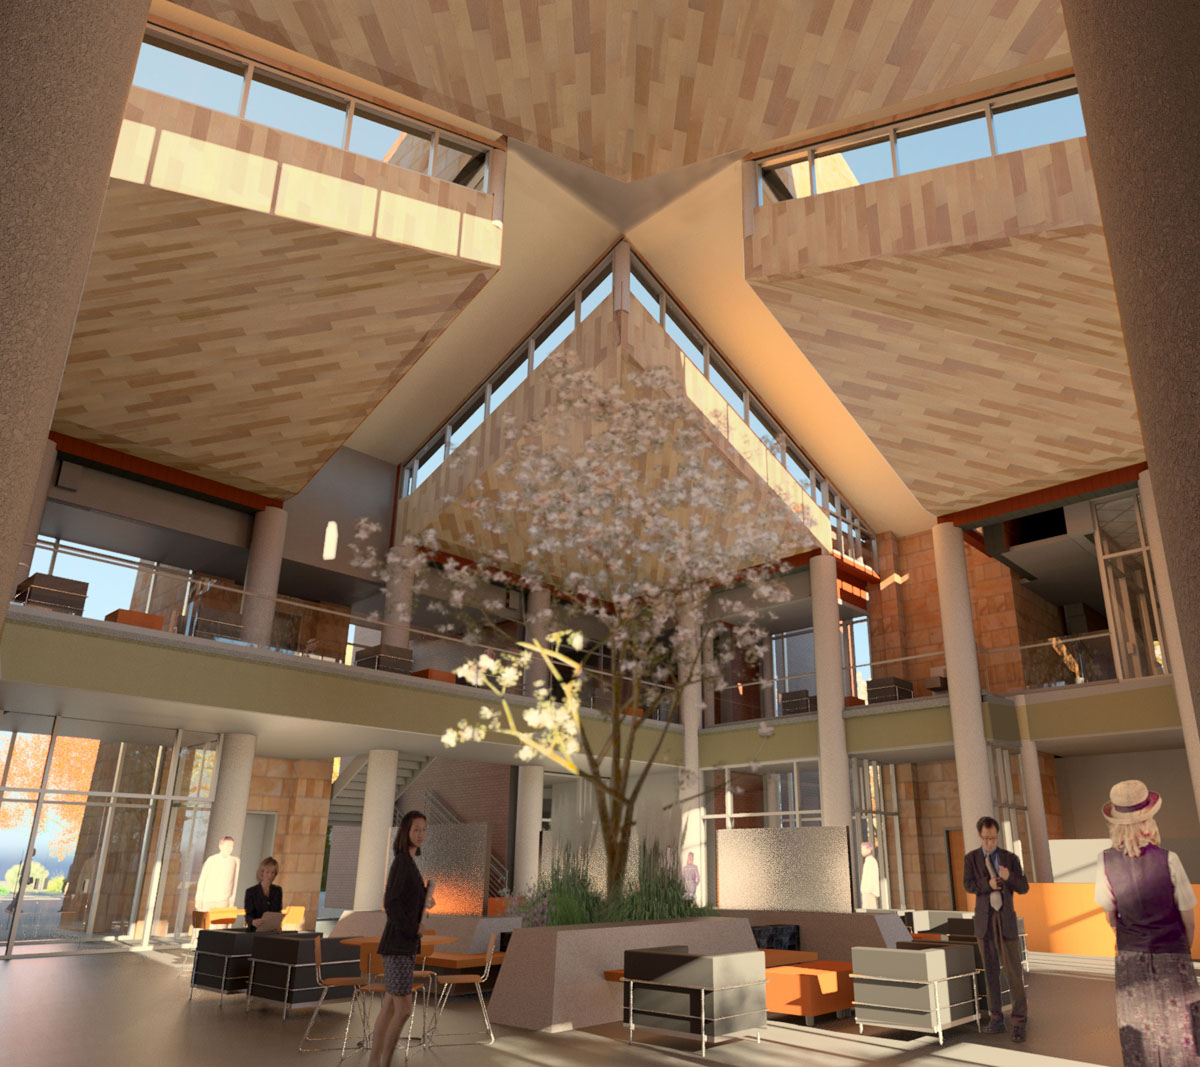 3D computer model of the interior atrium for the campus starter concept building.